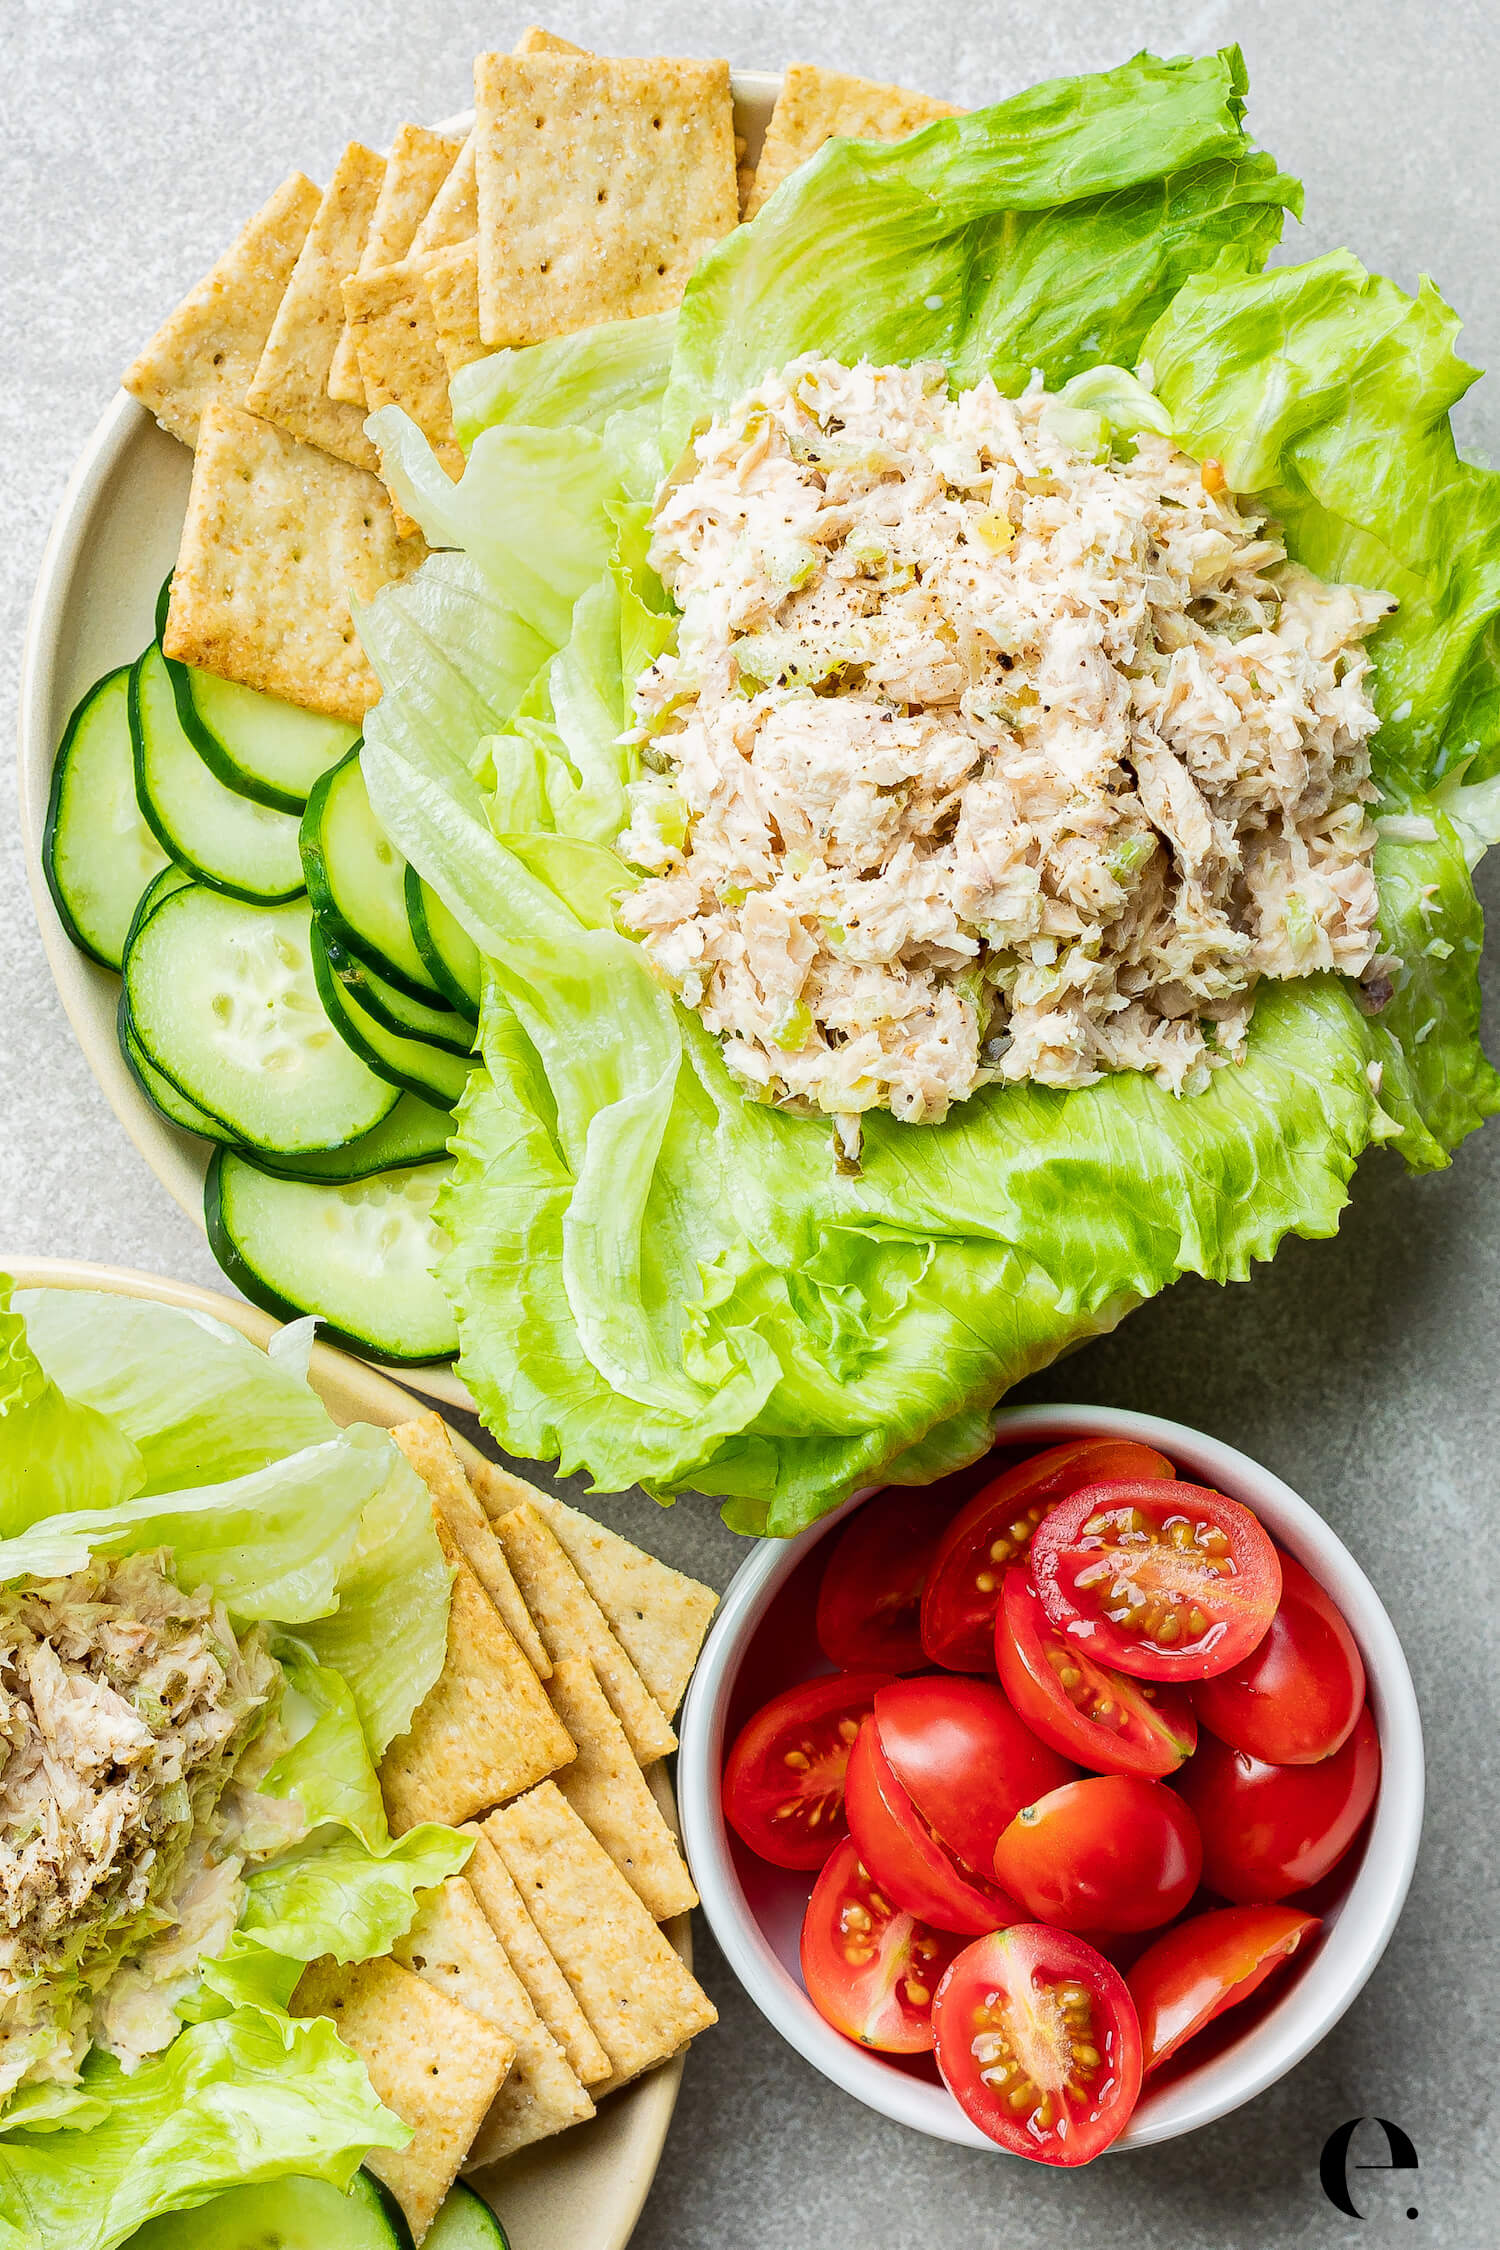 classic tuna salad with lettuce and crackers on plate